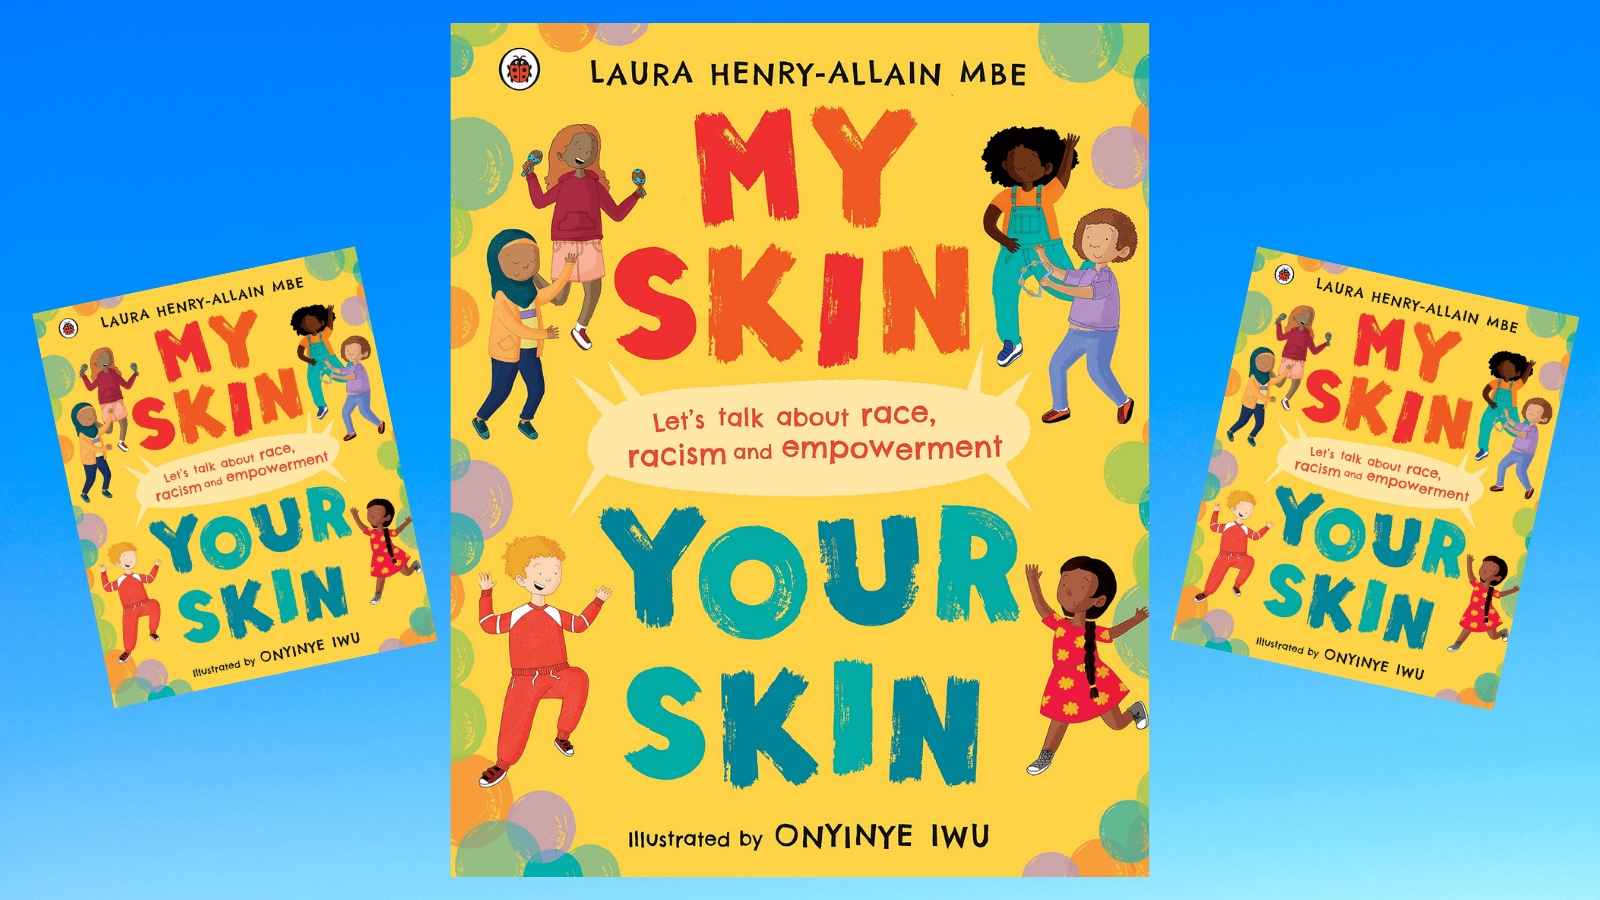 ‘My Skin, Your Skin’ book shows it’s never too early to talk about race